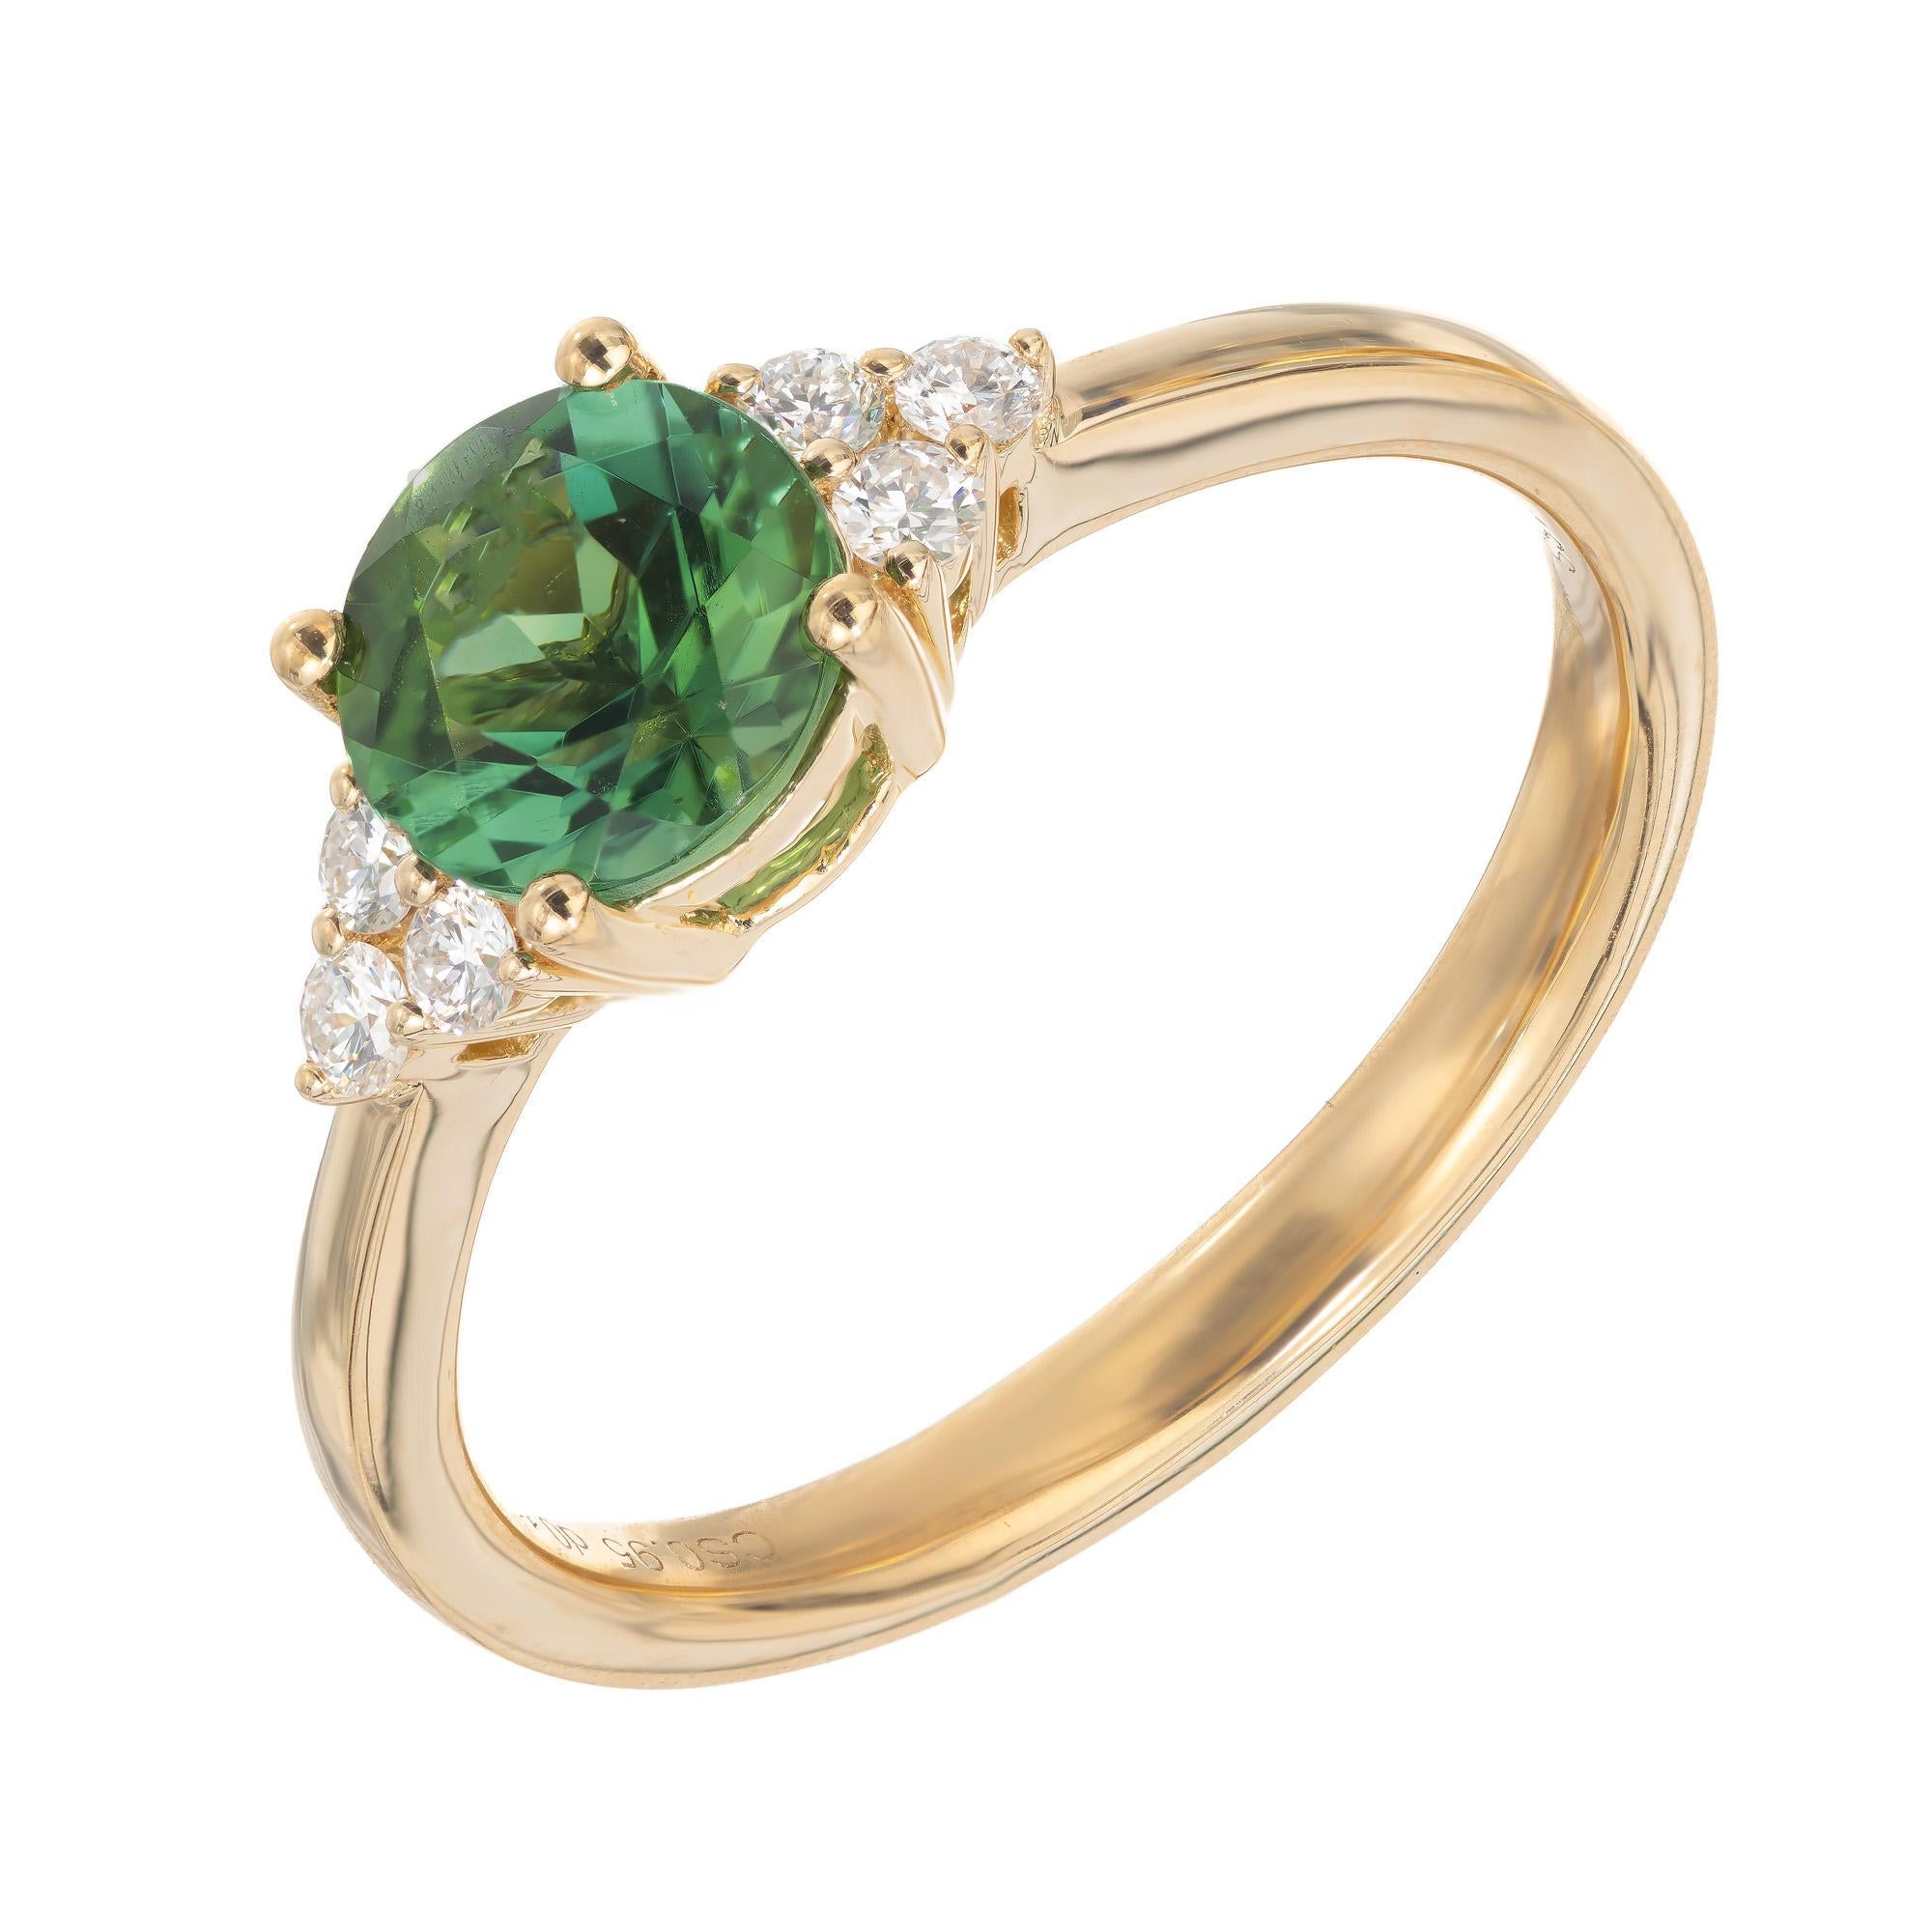 Bright green tourmaline and diamond engagement ring. .95ct round cut center tourmaline accented with three round brilliant cut diamonds on each side of the stone and mounted in a 18k yellow gold setting designed and crafted in the Peter Suchy